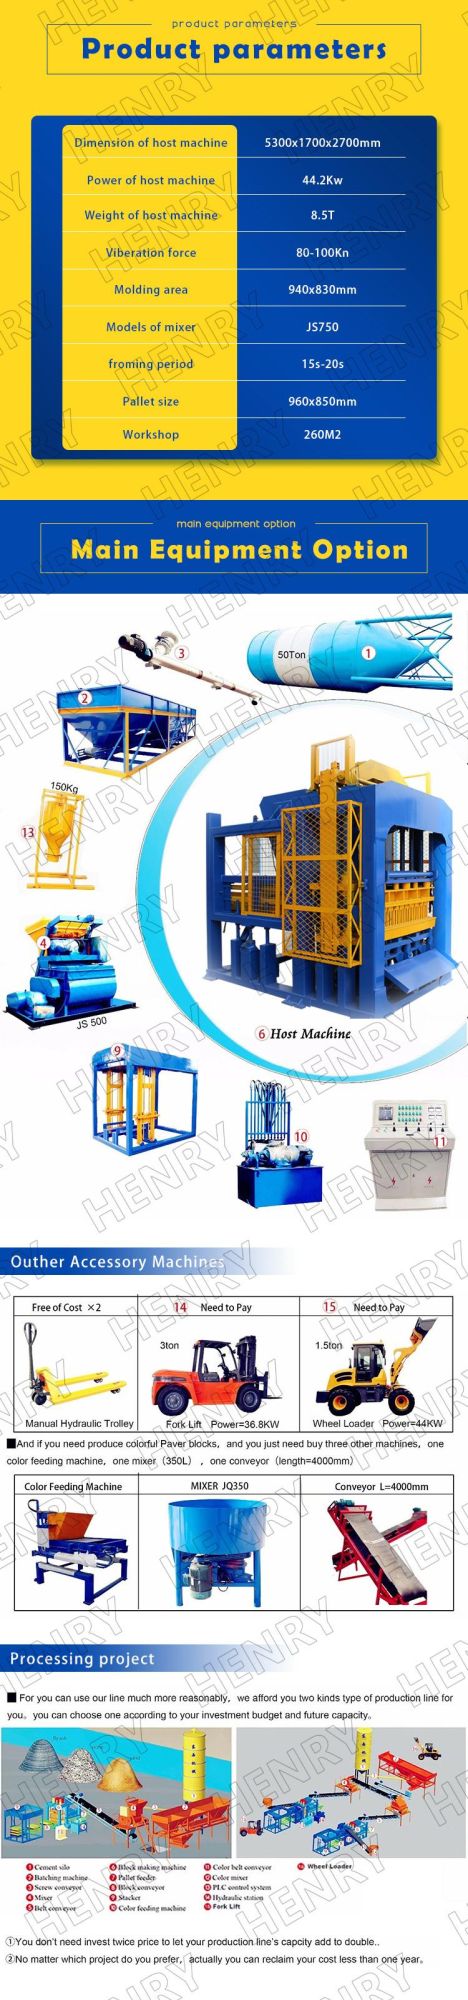 Qt8-15 Advanced High Quality Hydraulic Fully Automatic Hollow Concrete Block Making Machine Cement Paver Curbstone Machine Production Line